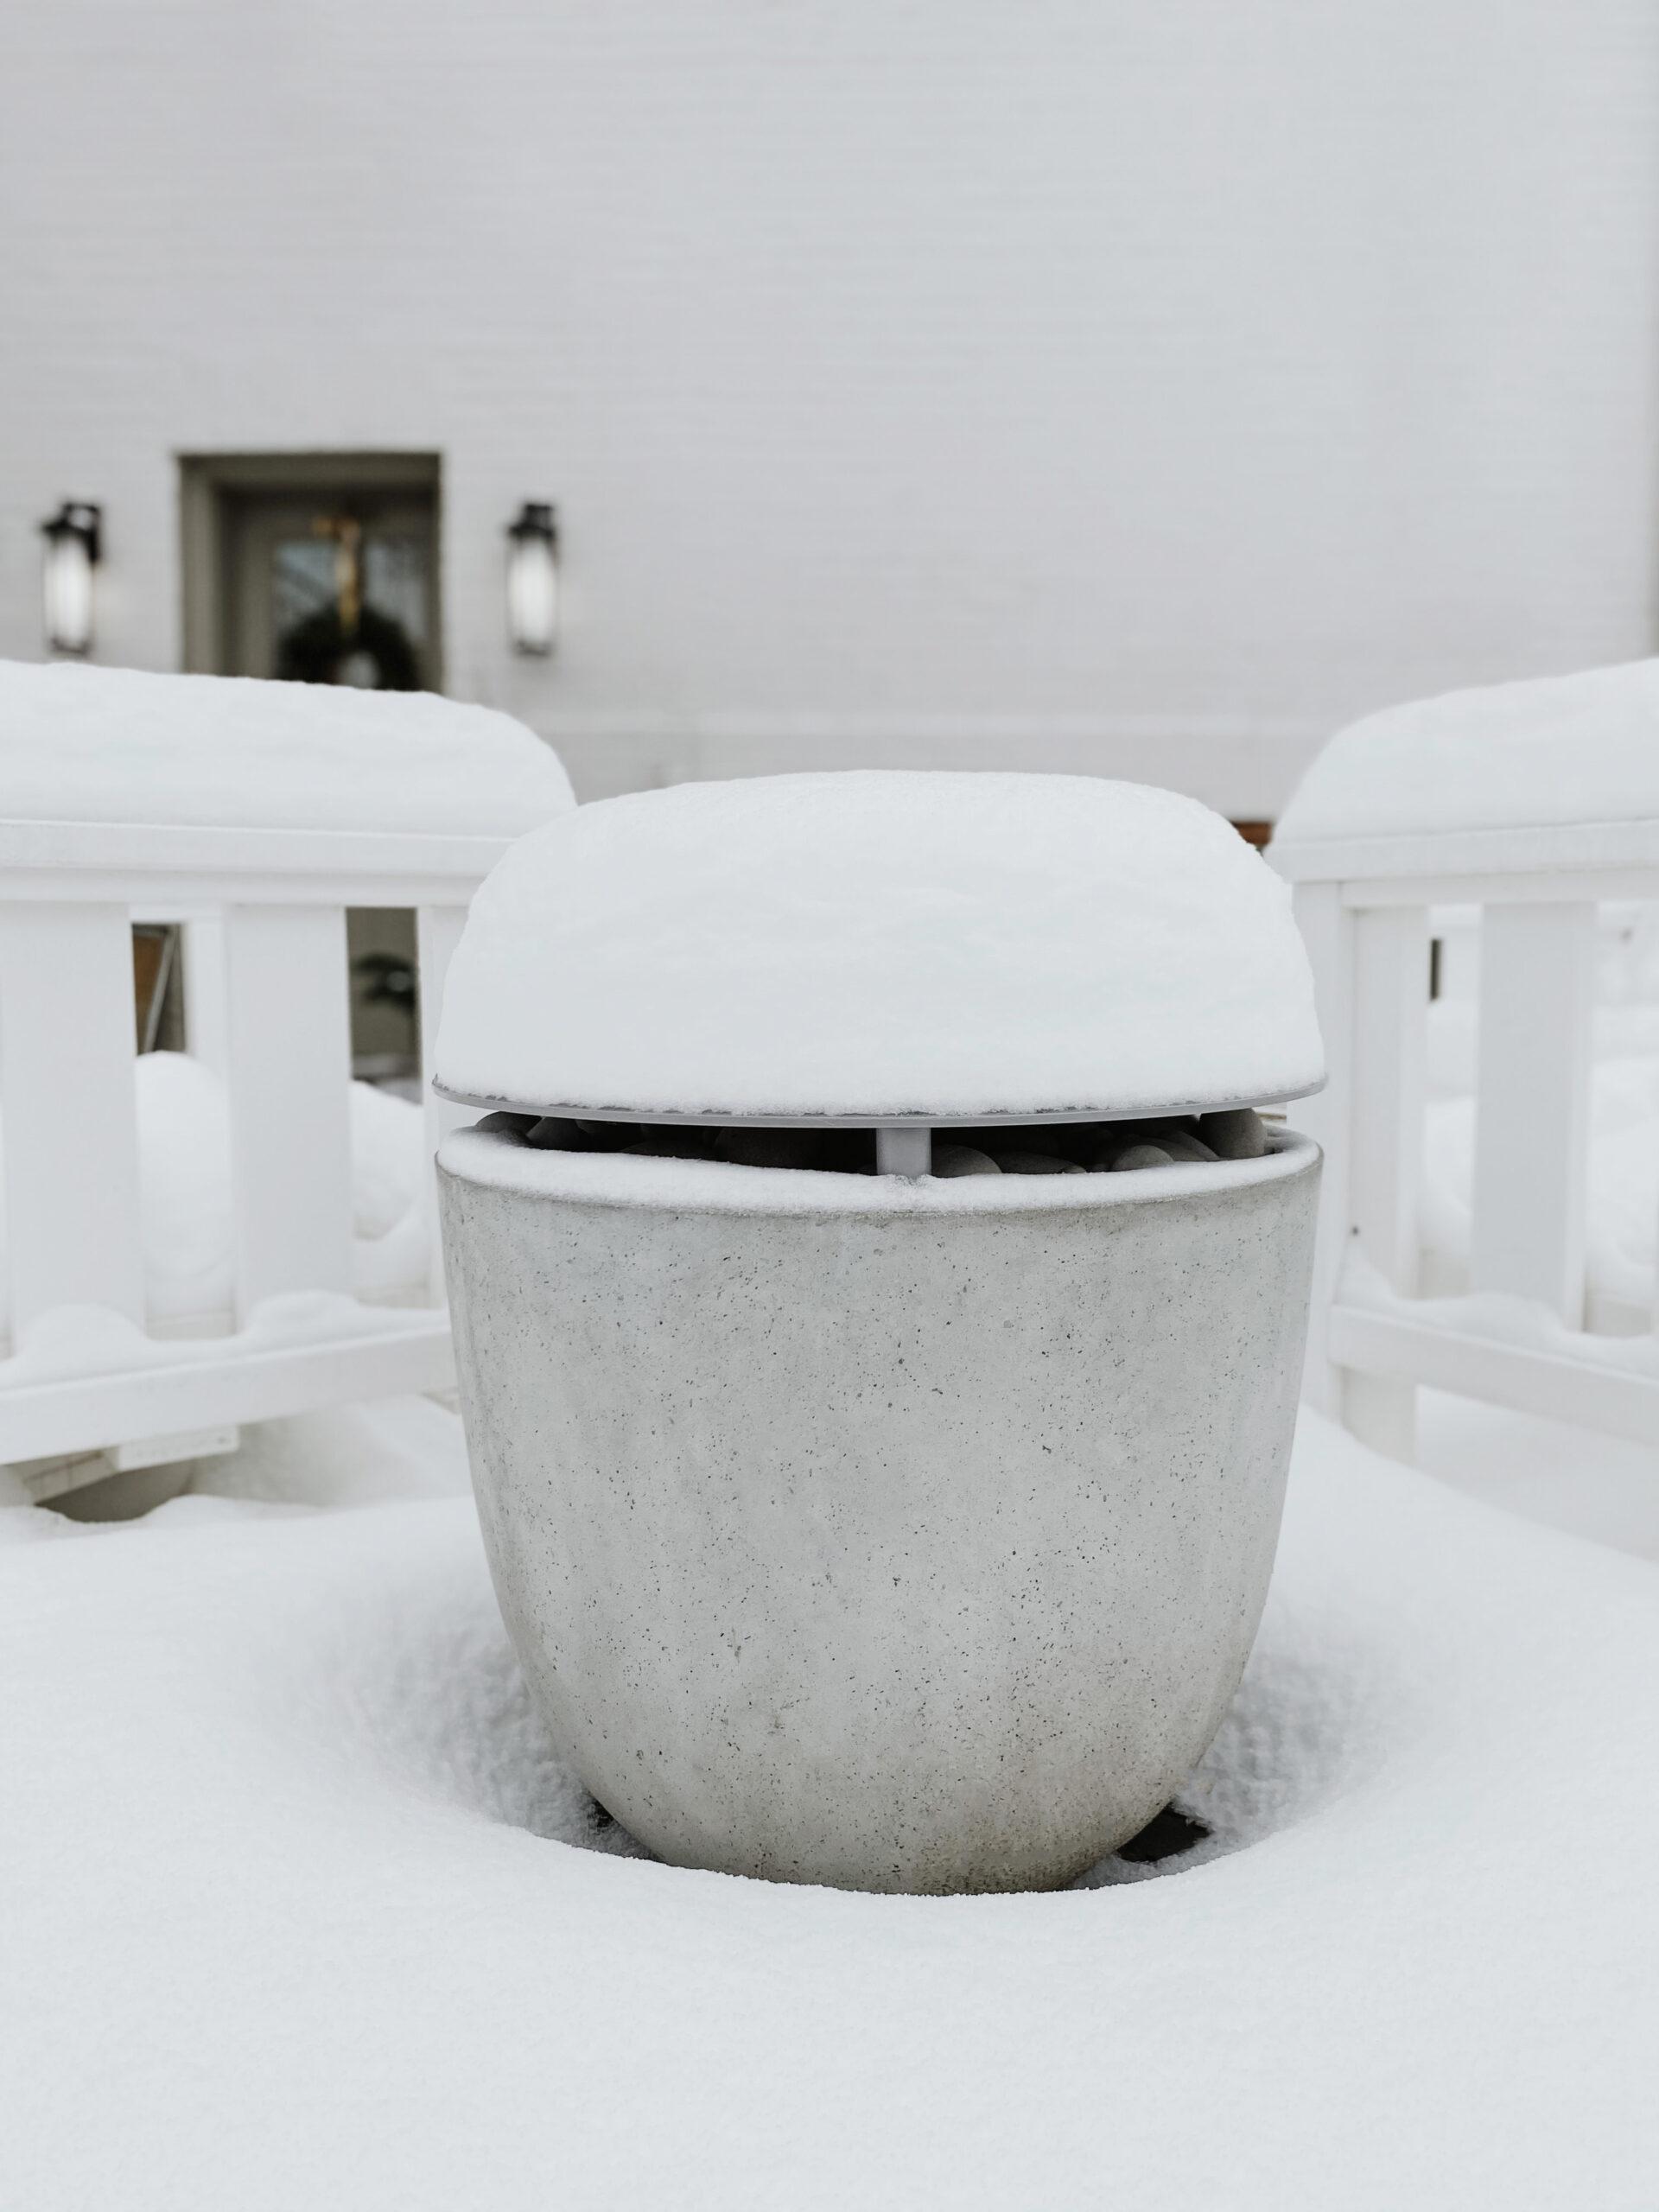 Fire-pit-in-the-snow